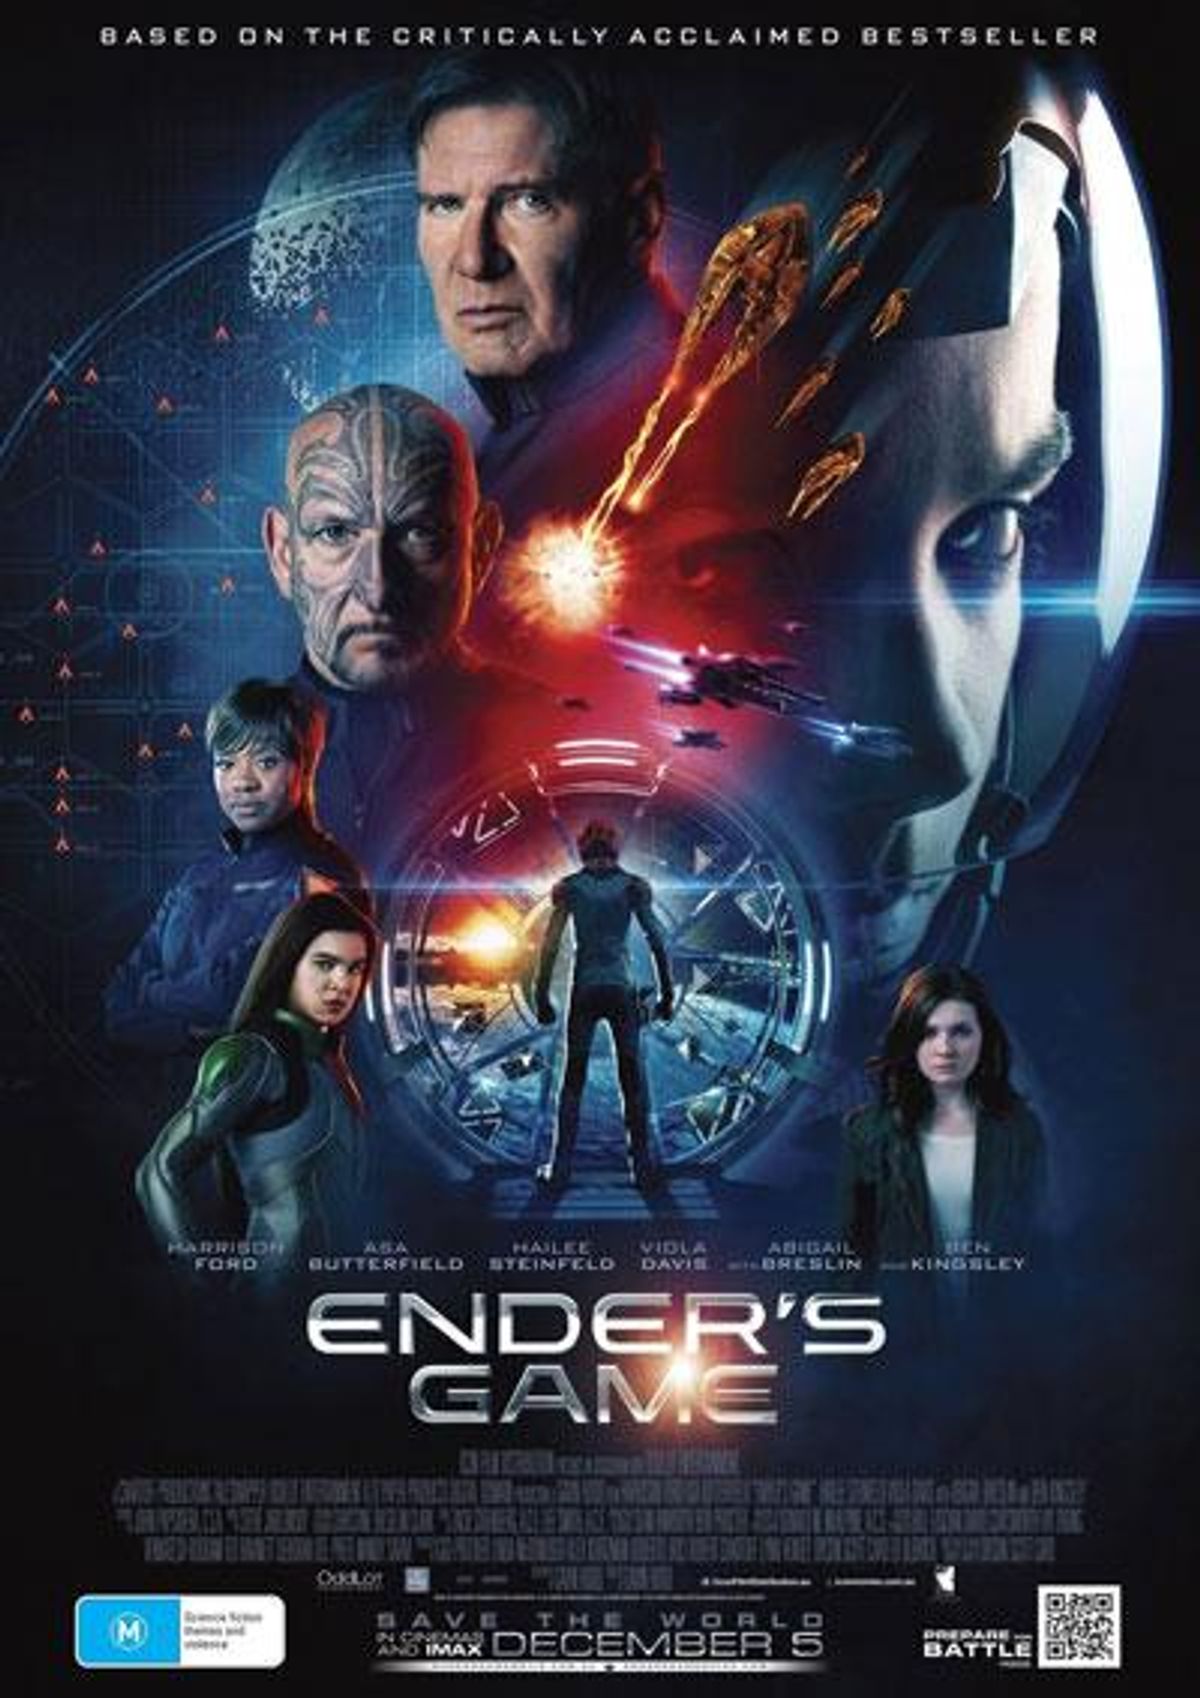 Enders-game-poster05